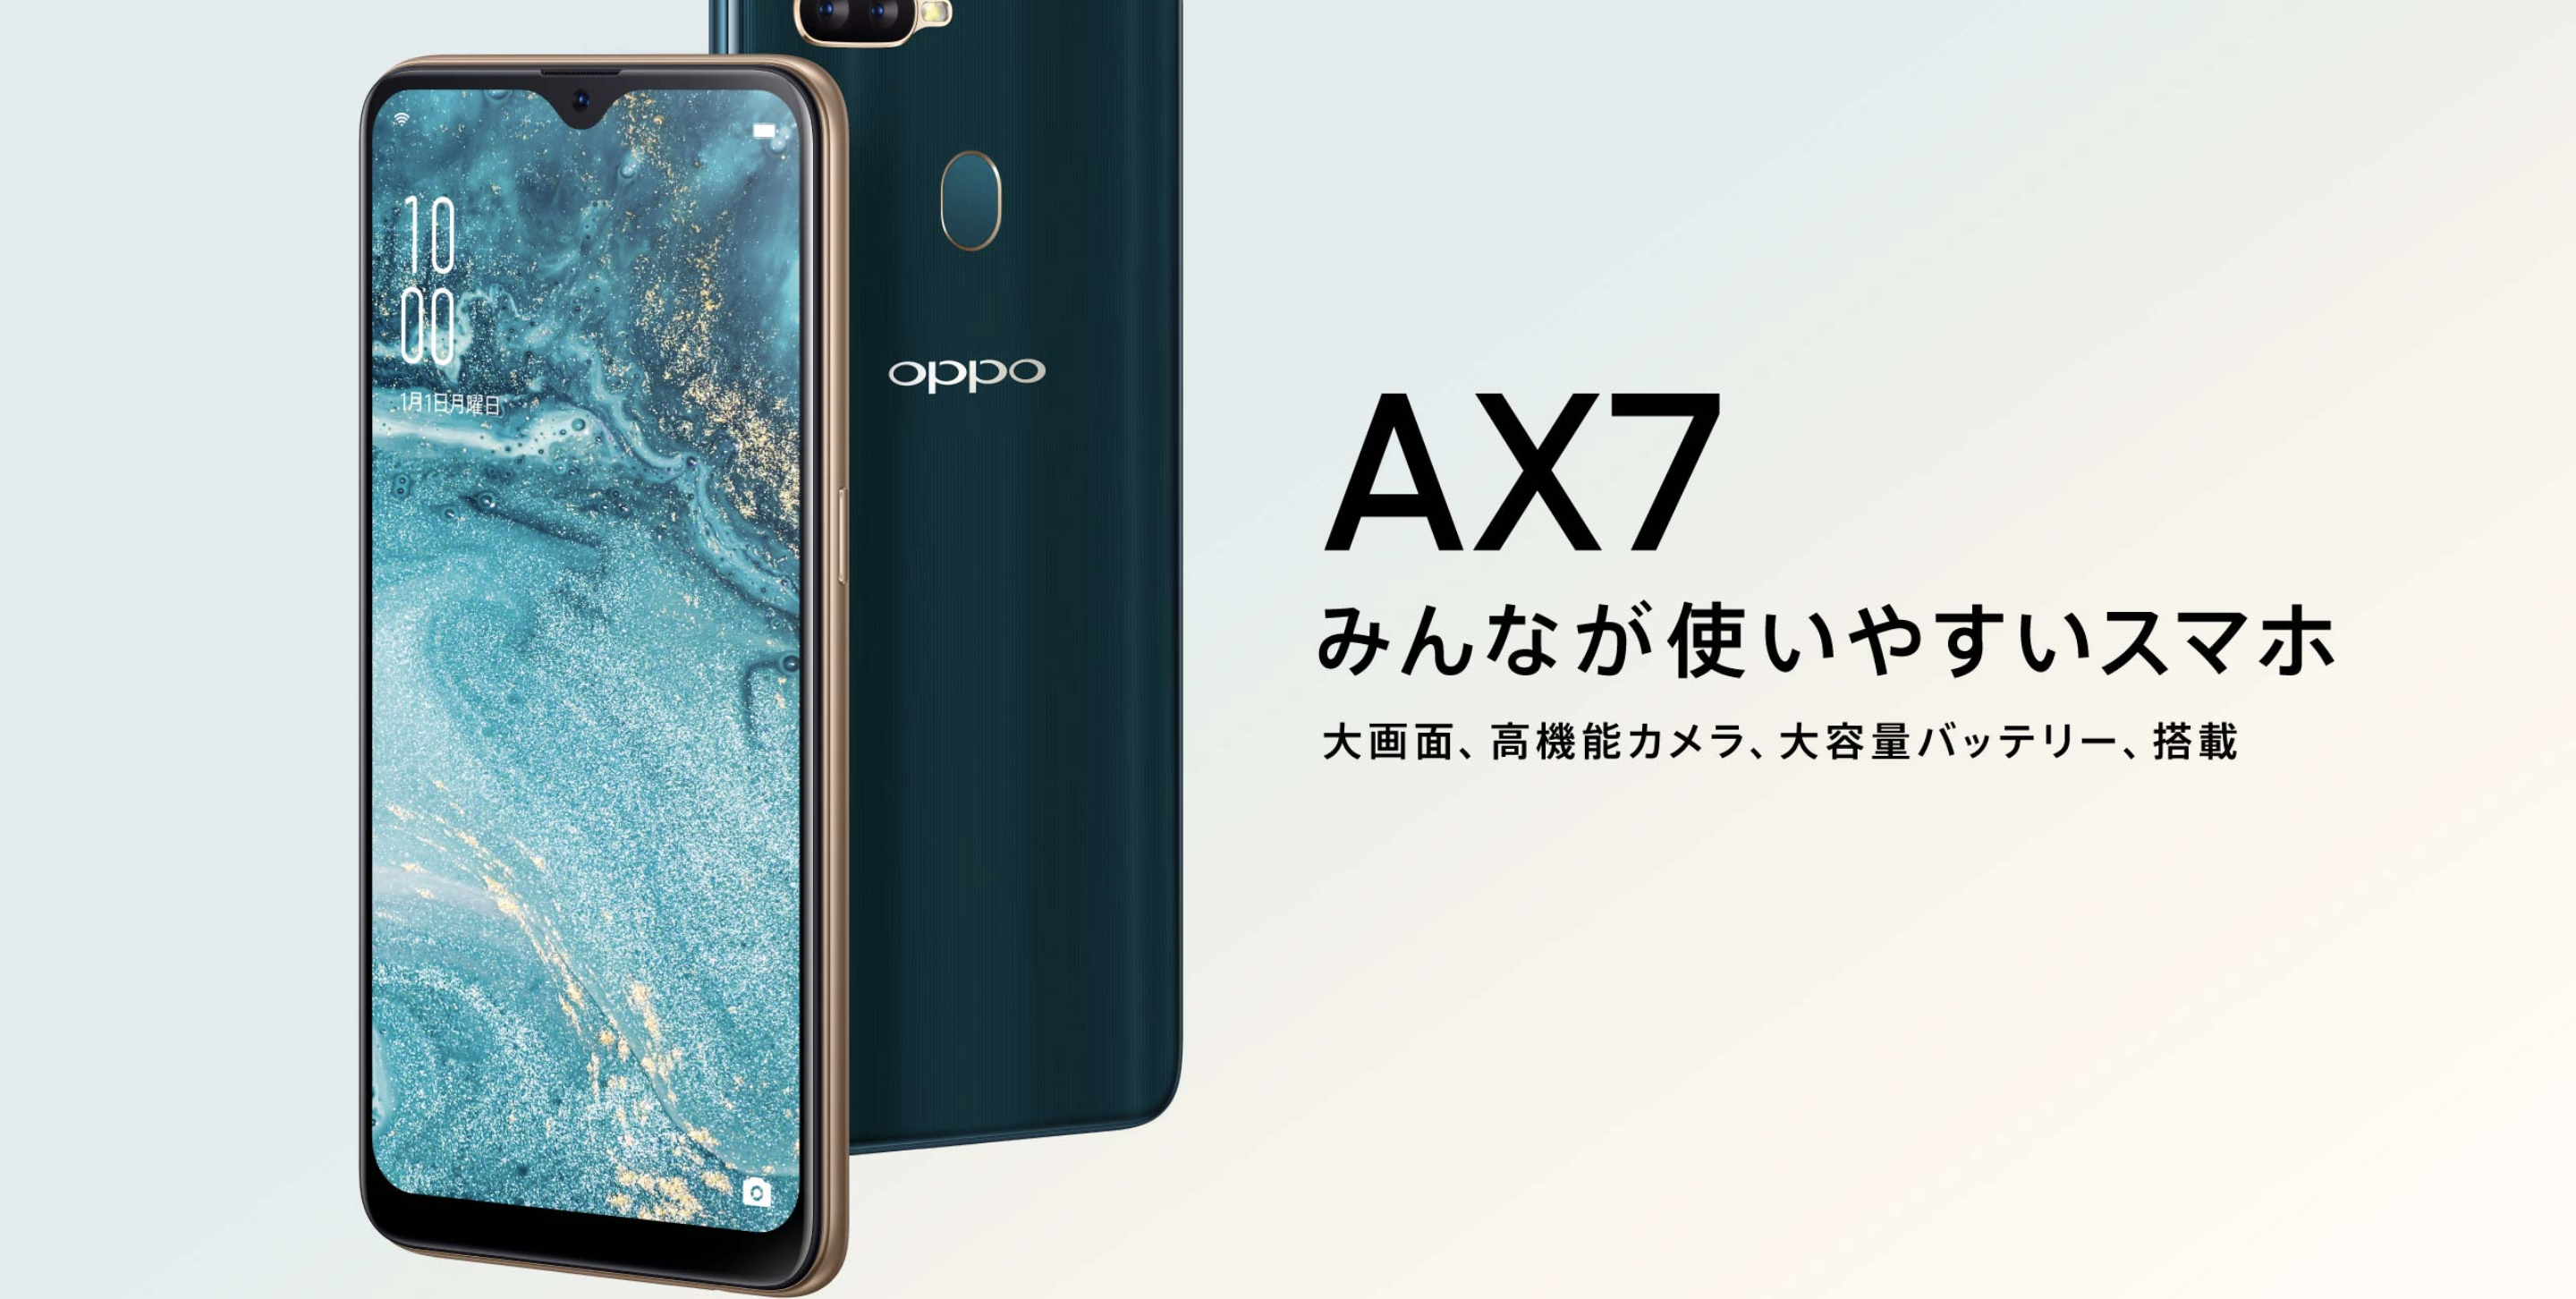 OPPO AX7 home